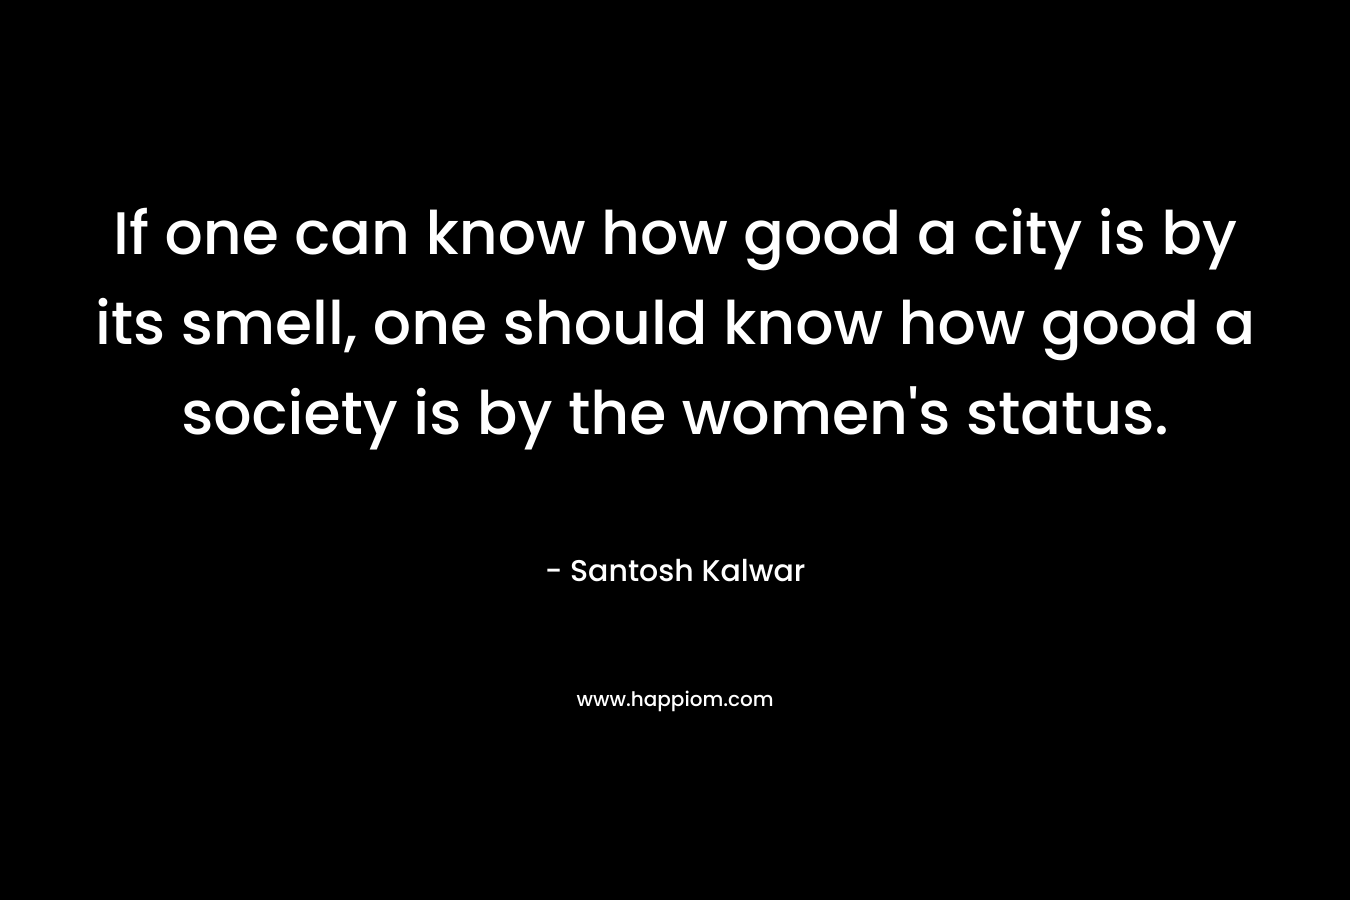 If one can know how good a city is by its smell, one should know how good a society is by the women's status.